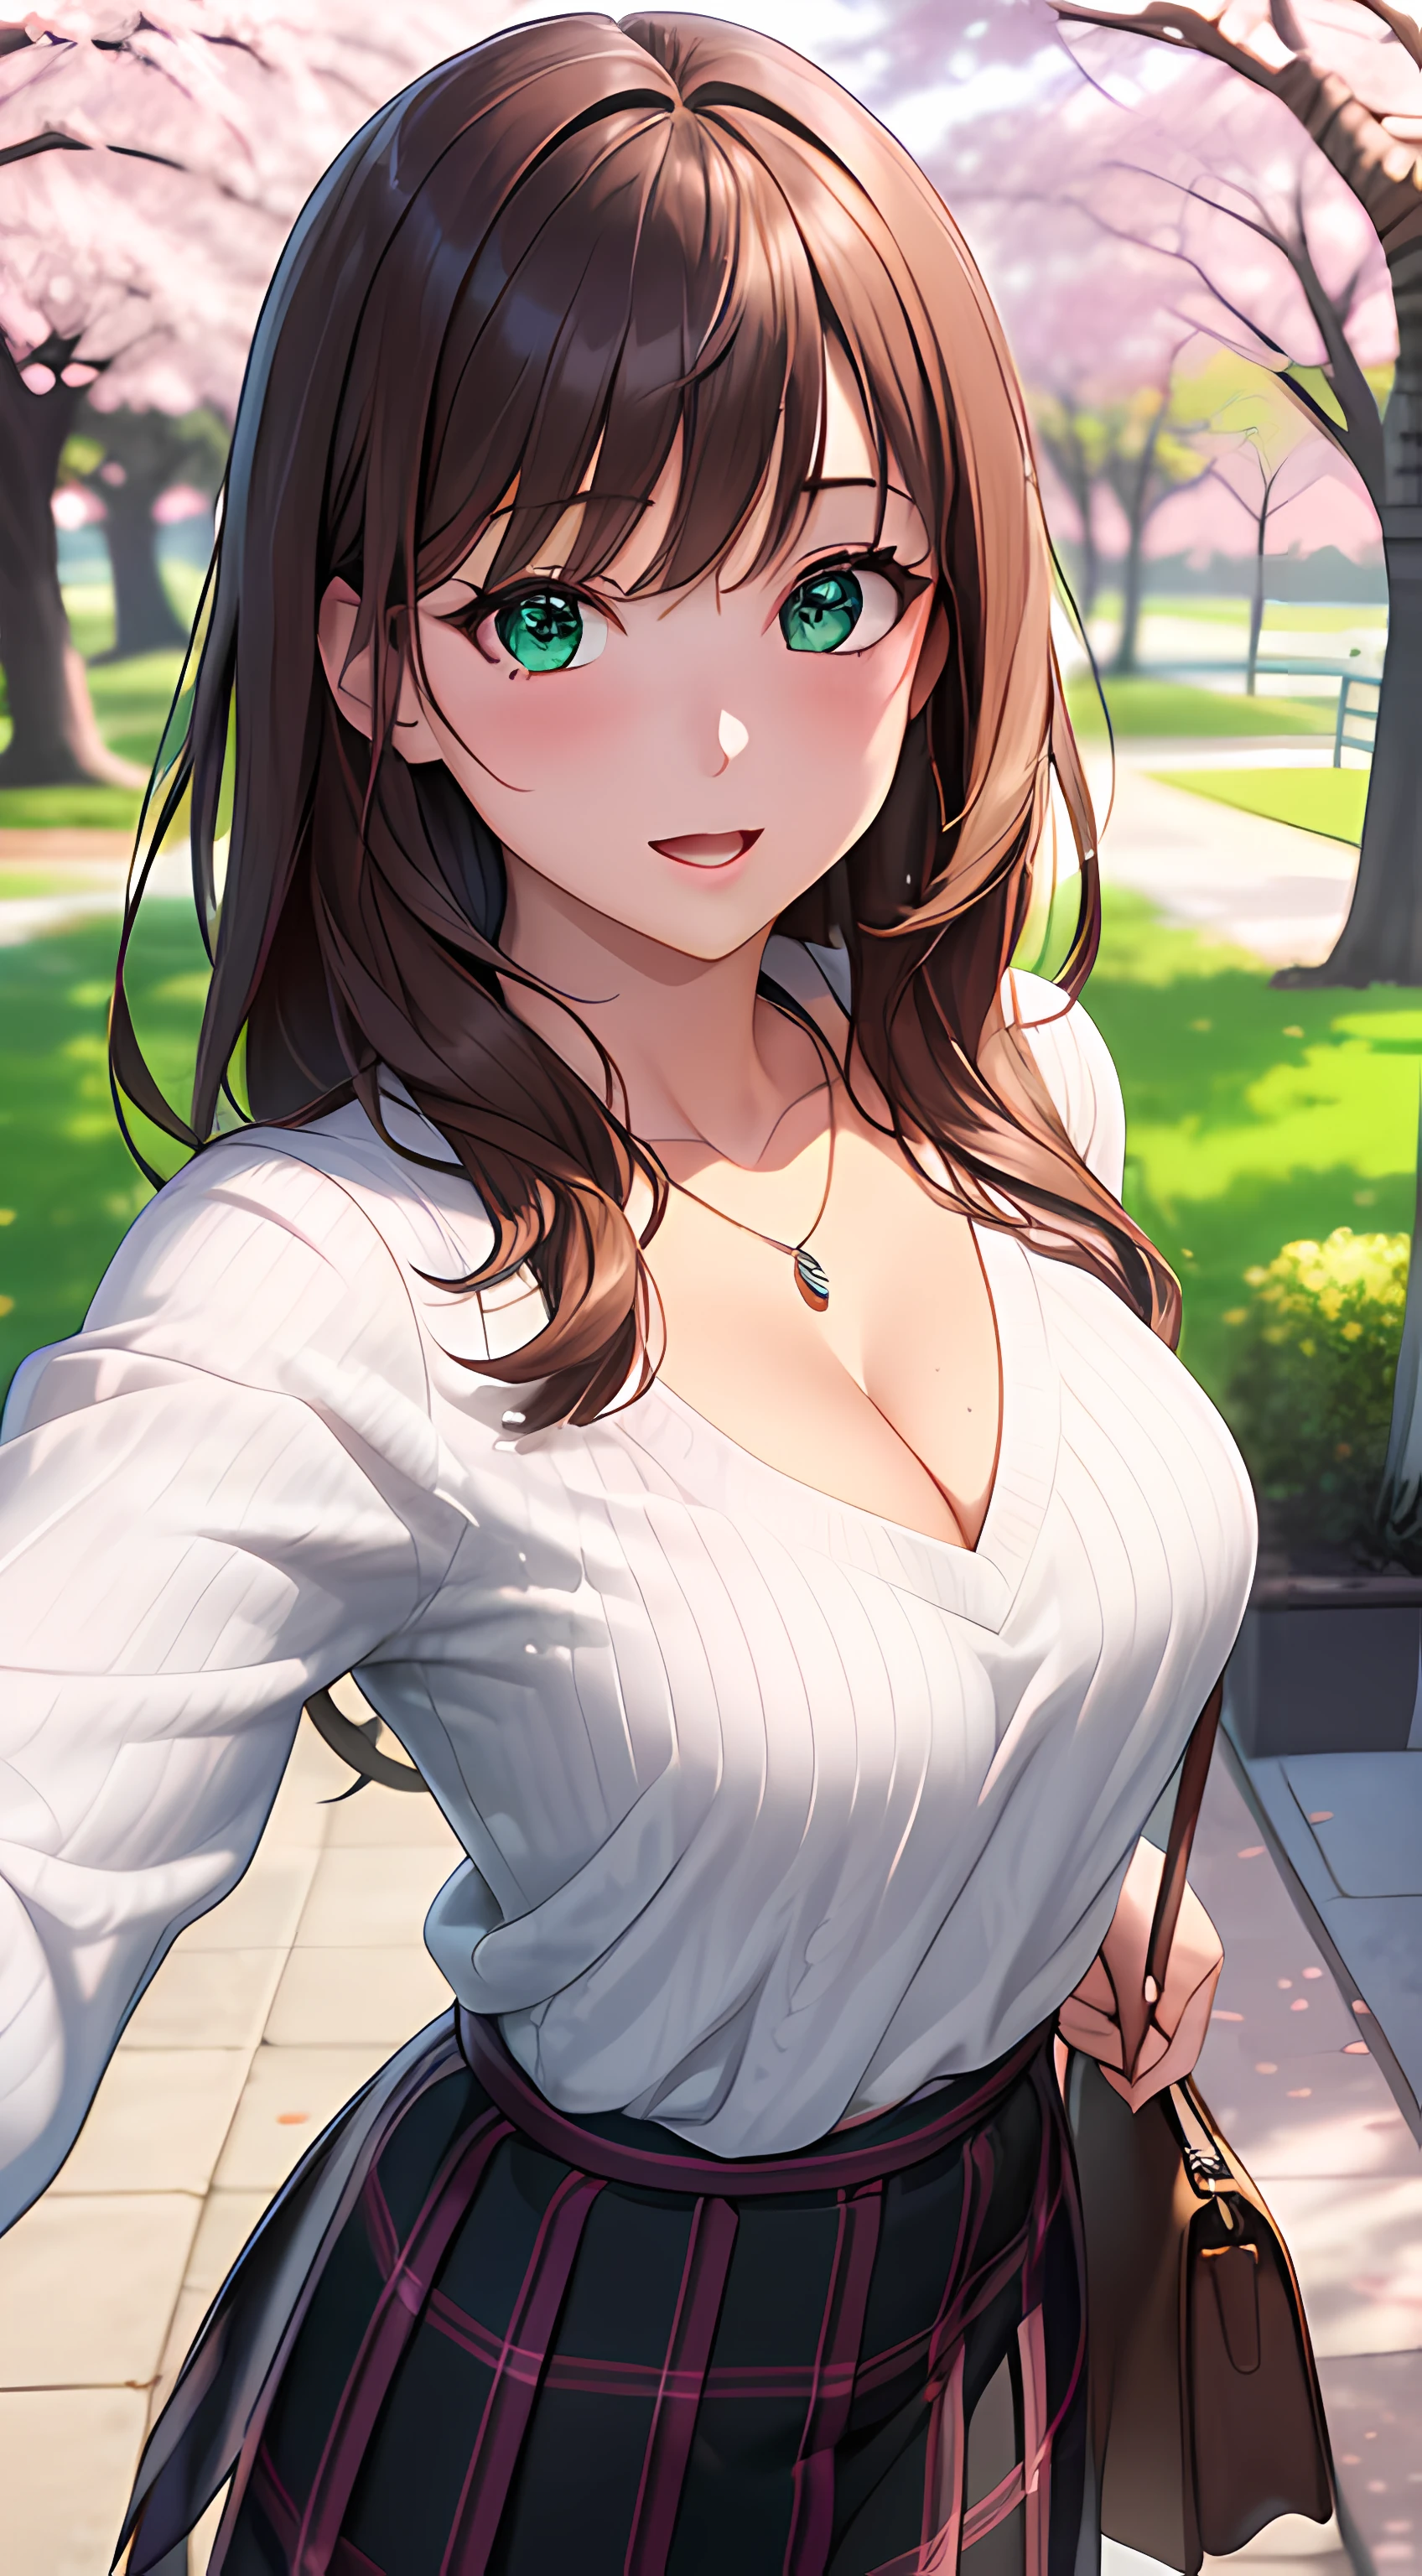 ((masterpiece, best quality, highres, UHD, perfect pixel, depth of field, 4k, RTX, HDR))), 1girl, single, solo, beautiful anime girl, beautiful artstyle, anime character, ((long hair, bangs, brown hair)), ((green eyes:1.4, rounded eyes, beautiful eyelashes, realistic eyes)), ((detailed face, blushing:1.2)), ((smooth texture:0.75, realistic texture:0.65, photorealistic:1.1, anime CG style)), ((medium breasts, cleavage, busty)), dynamic angle, perfect body, ((POV, selfie pose, portrait)), ((white sweater, long sleeve, black skirt, plaid skirt, fashionable, 1handbag, 1diamond necklace)), smile, open mouth, amusement park, ((cherry blossom tree, cherry blossoms fall))